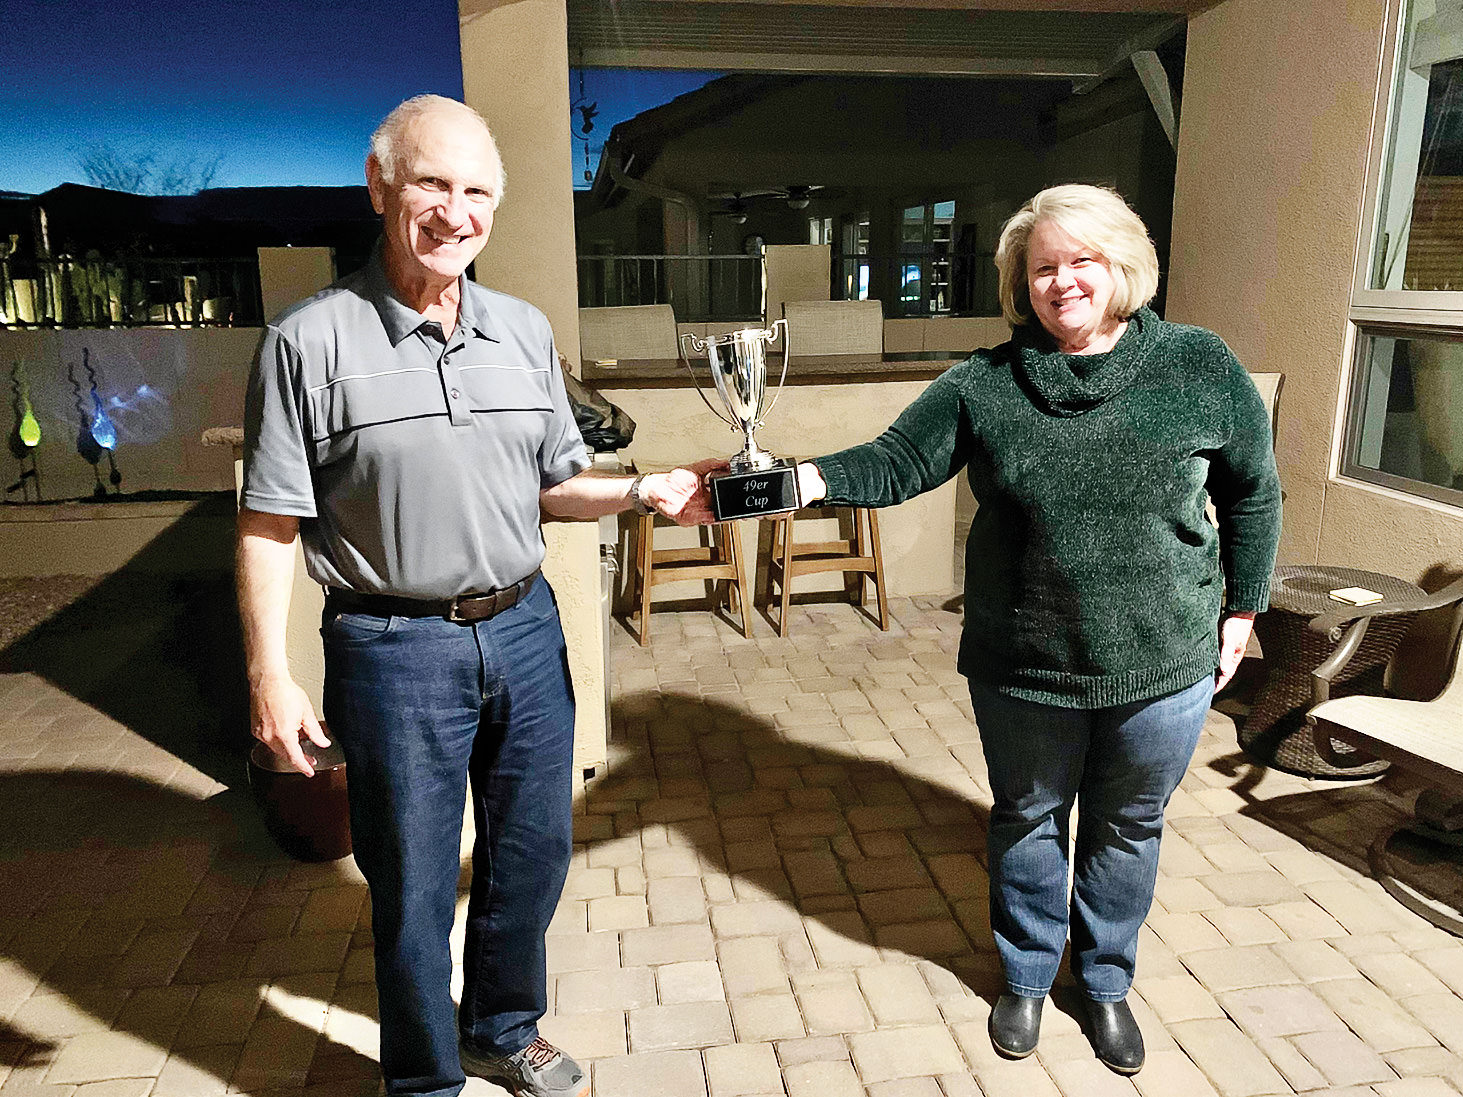 Last year’s champ, Gayle Heaton, awards Dennis the 2020 trophy.